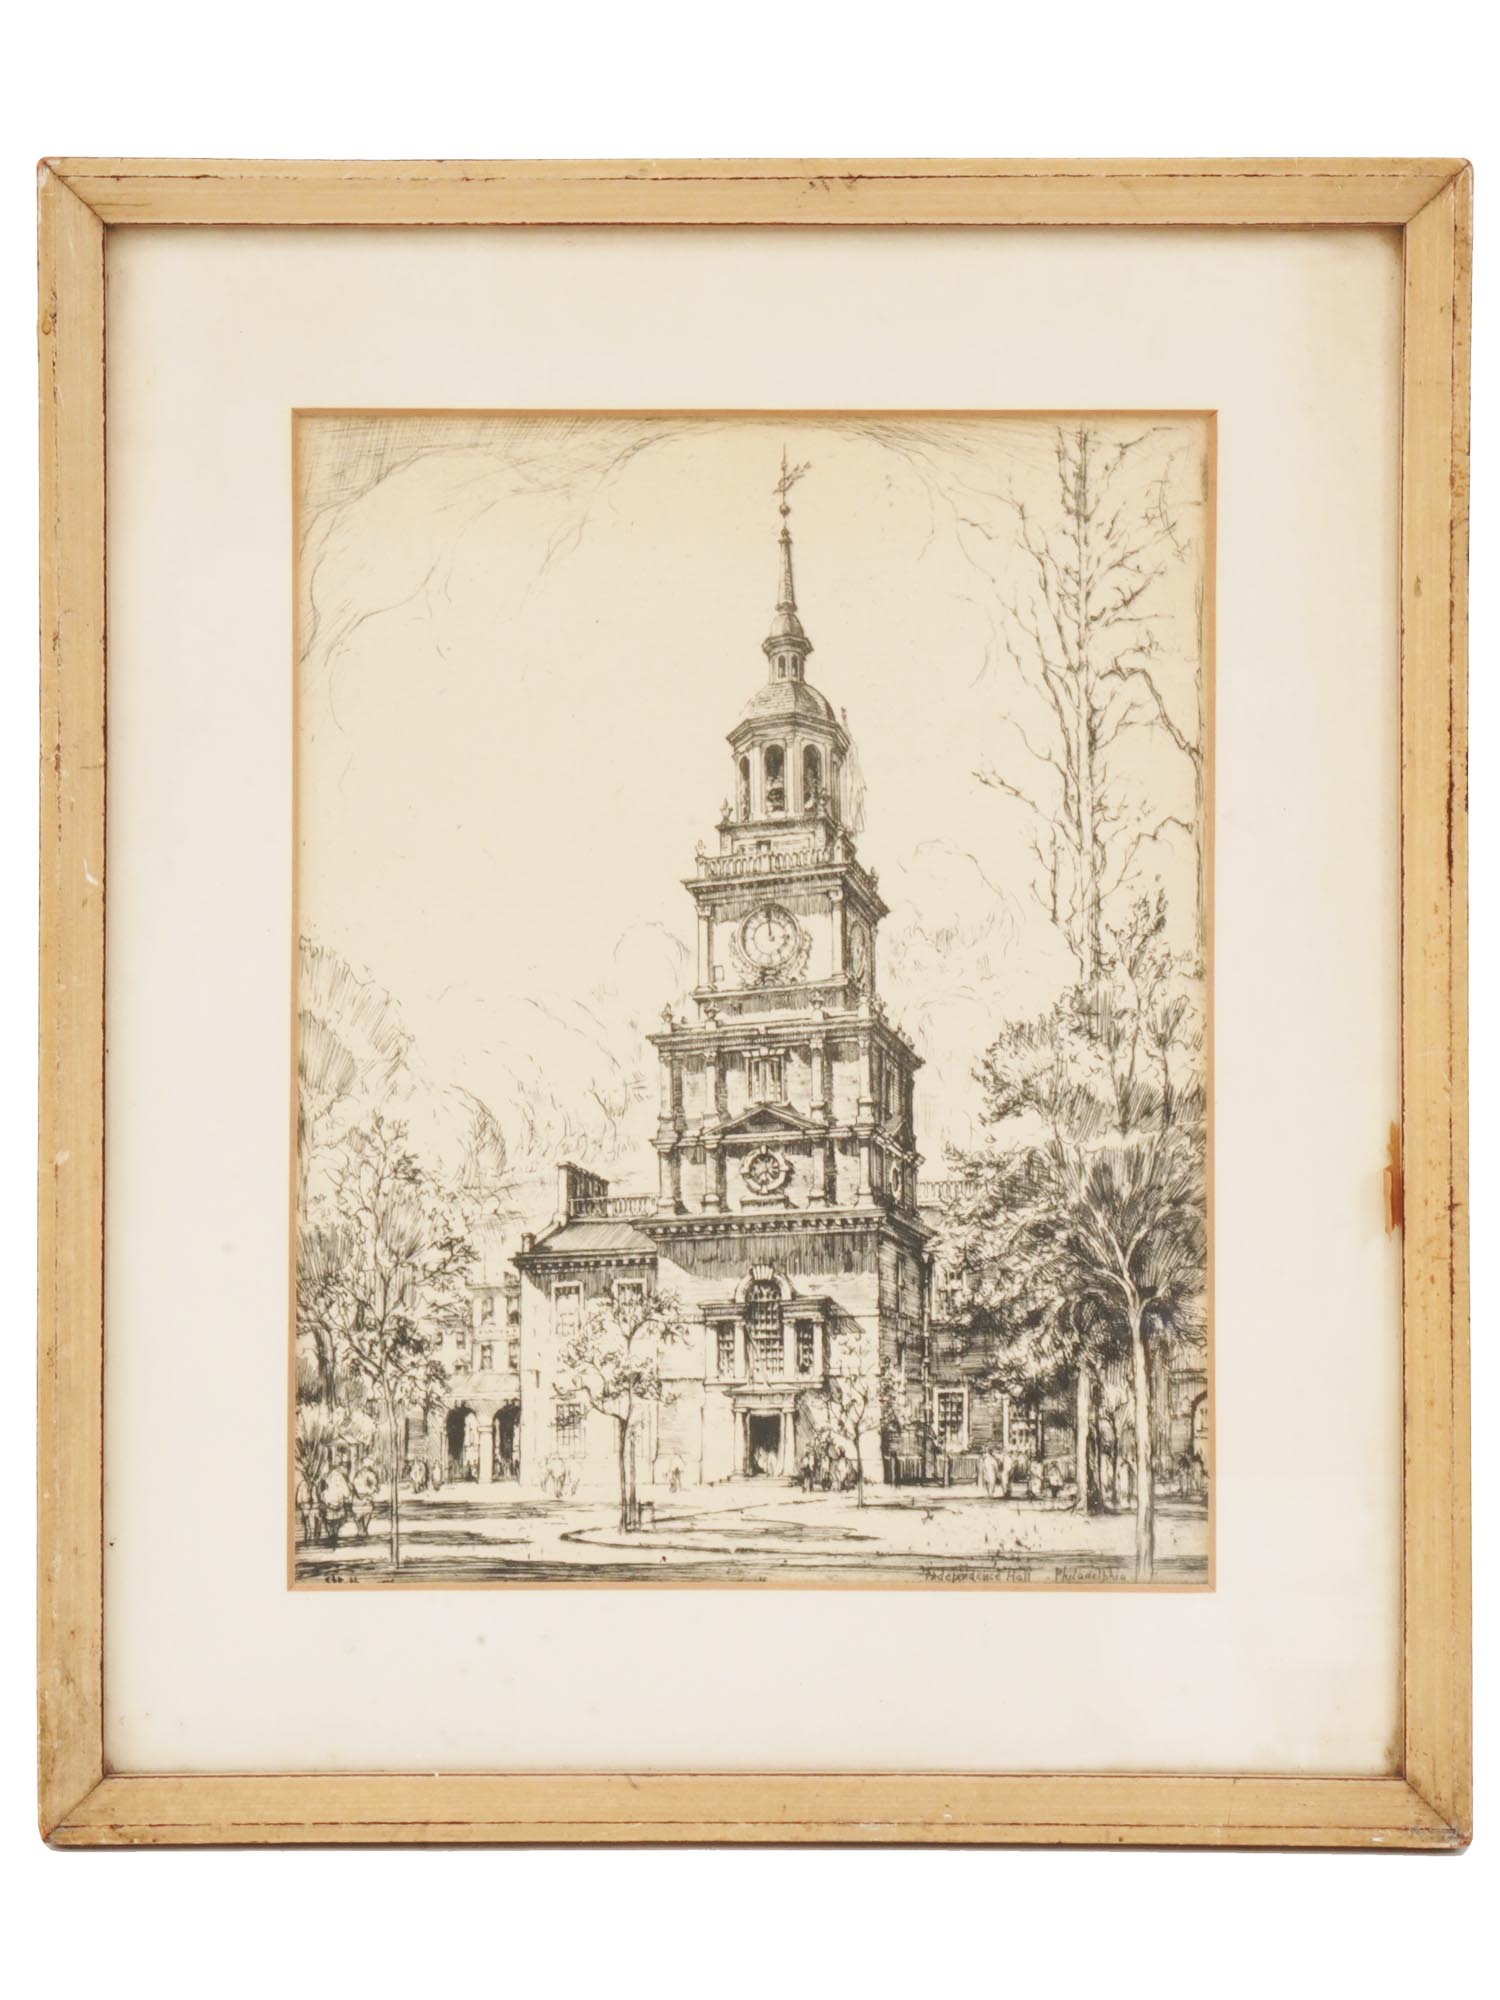 ETCHING OF INDEPENDENCE HALL BY CHARLES SESSLER PIC-0